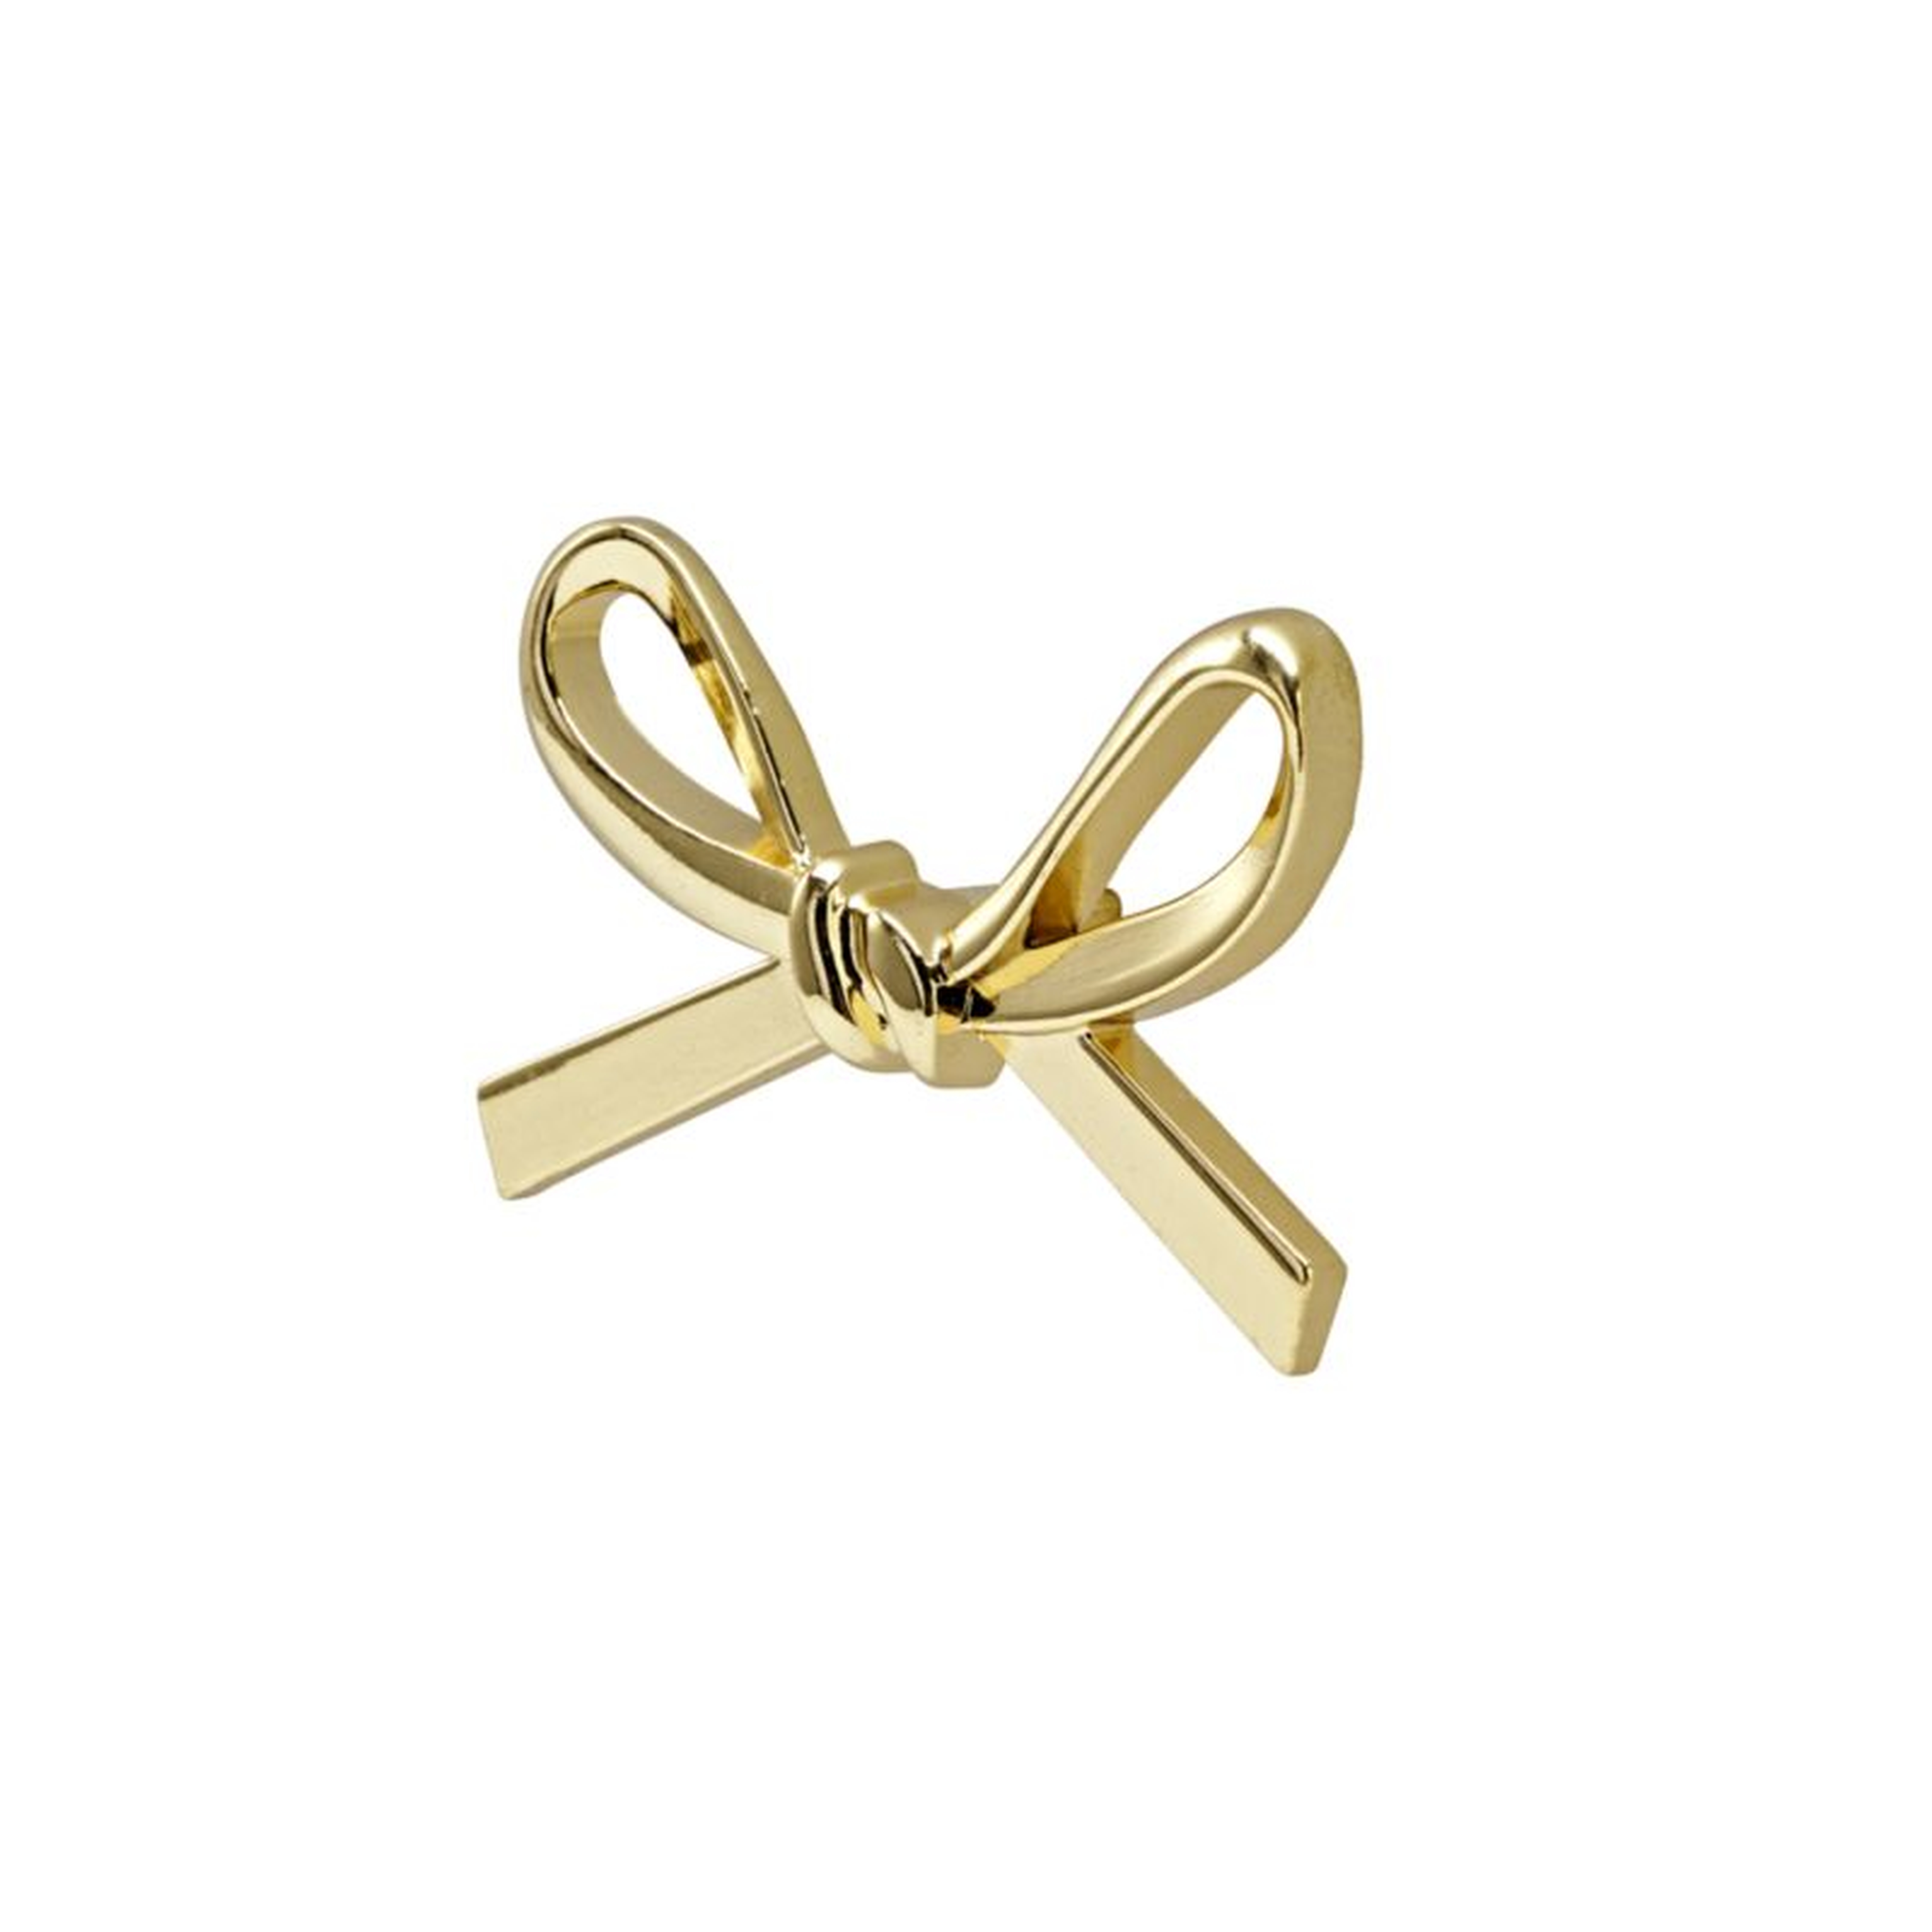 Gold Bow Metal Knob - Crate and Barrel